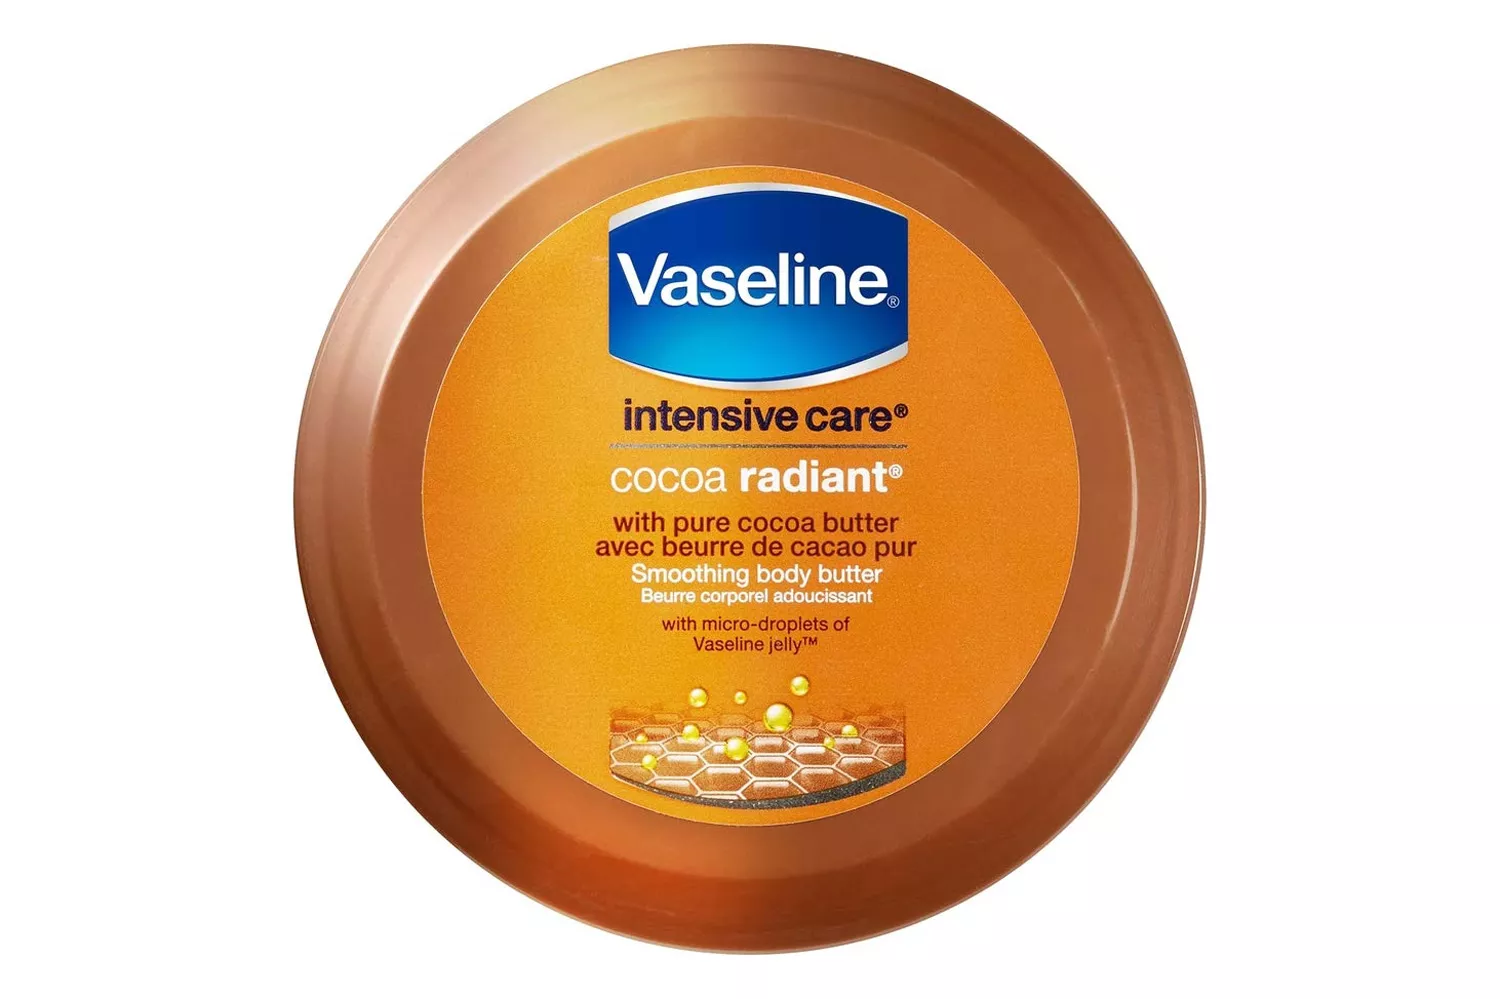 Vaseline Intensive Care Cocoa Radiant Smoothing Body Butter